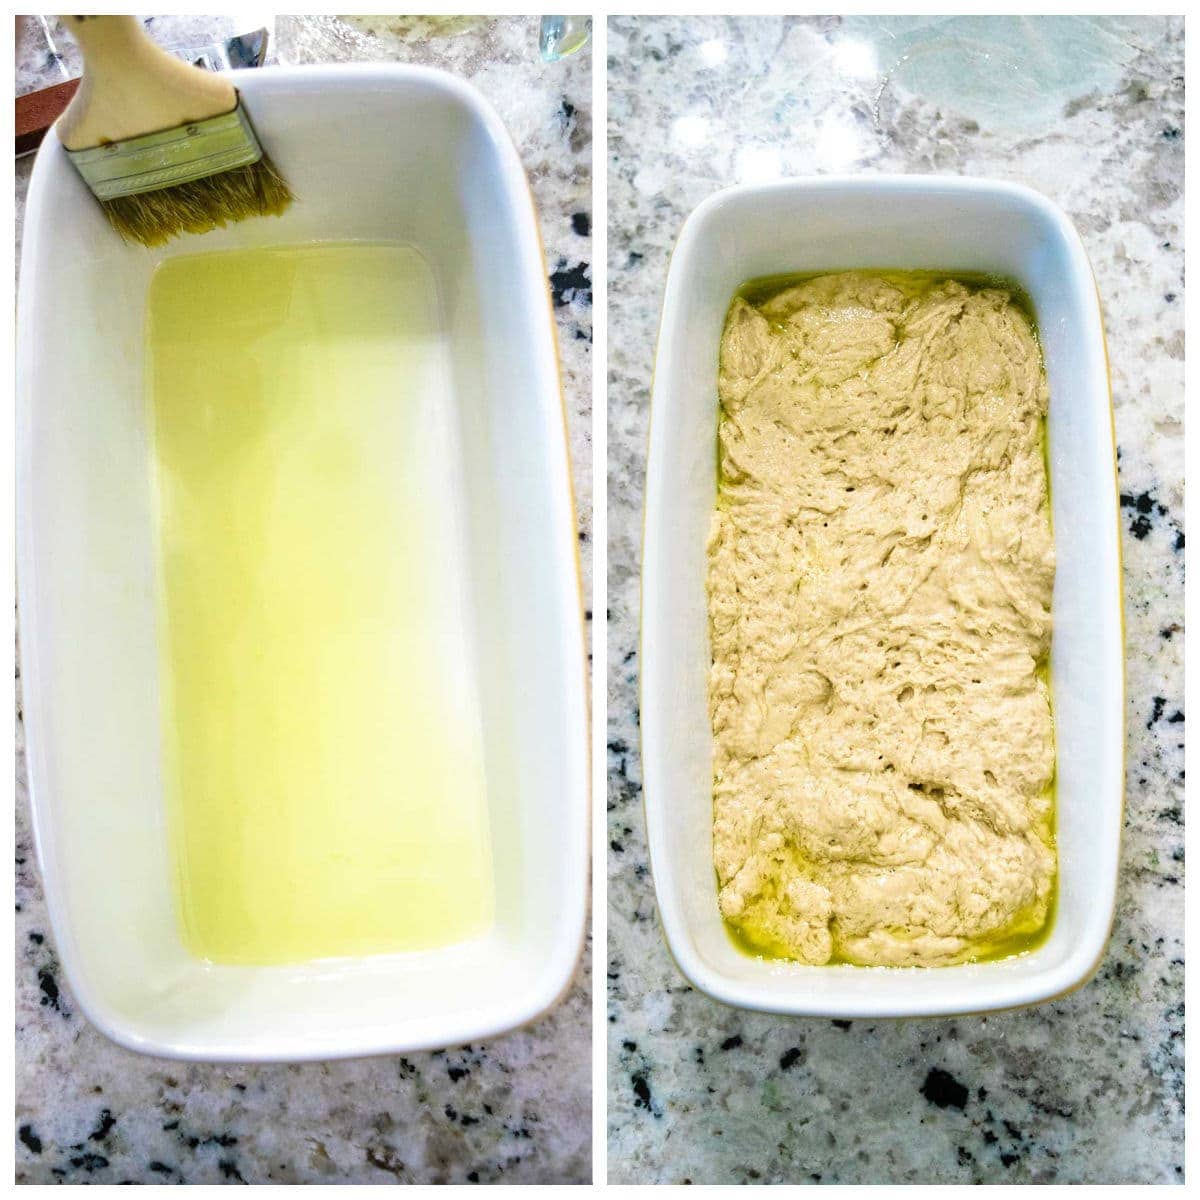 Collage image of buttering a bread baking dish and batter in dish.